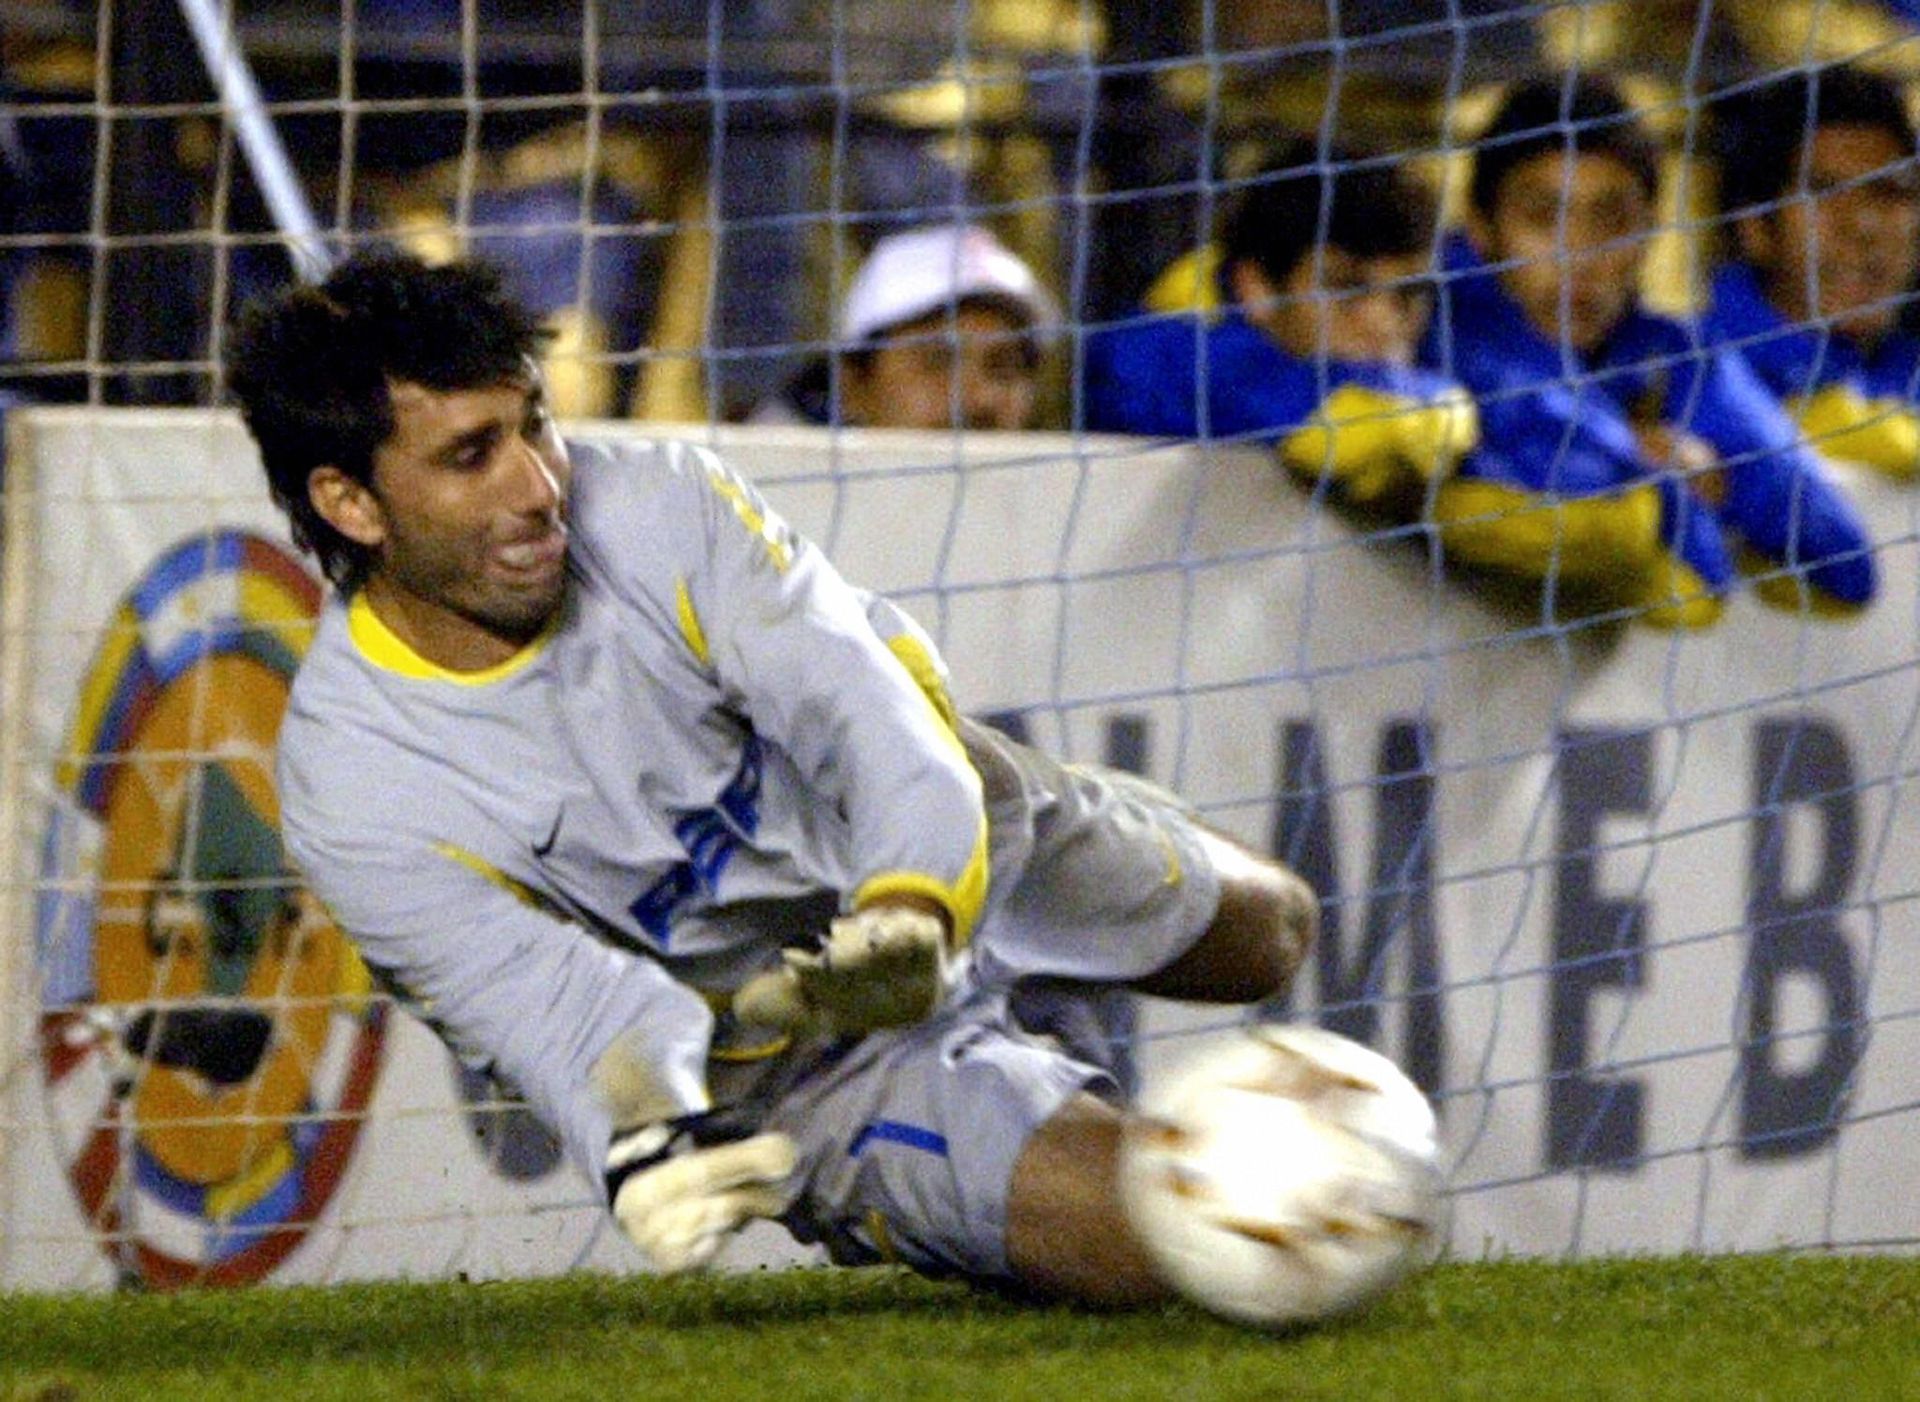 <p>                     Roberto Abbondanzieri was in goal for Boca Juniors as the Buenos Aires-based club won a series of international honours in the early 2000s.                   </p>                                      <p>                     A three-time Copa Libertadores champion in 2000, 2001 and 2003, Abbondanzieri also helped Boca claim the Intercontinental Cup in 2000 and 2003, plus two Copas Sudamericana in 2004 and 2005. He won 46 caps for Argentina and was first choice at the 2006 World Cup, when he was taken off injured at 1-0 up in the South Americans' eventual loss to Germany on penalties.                   </p>